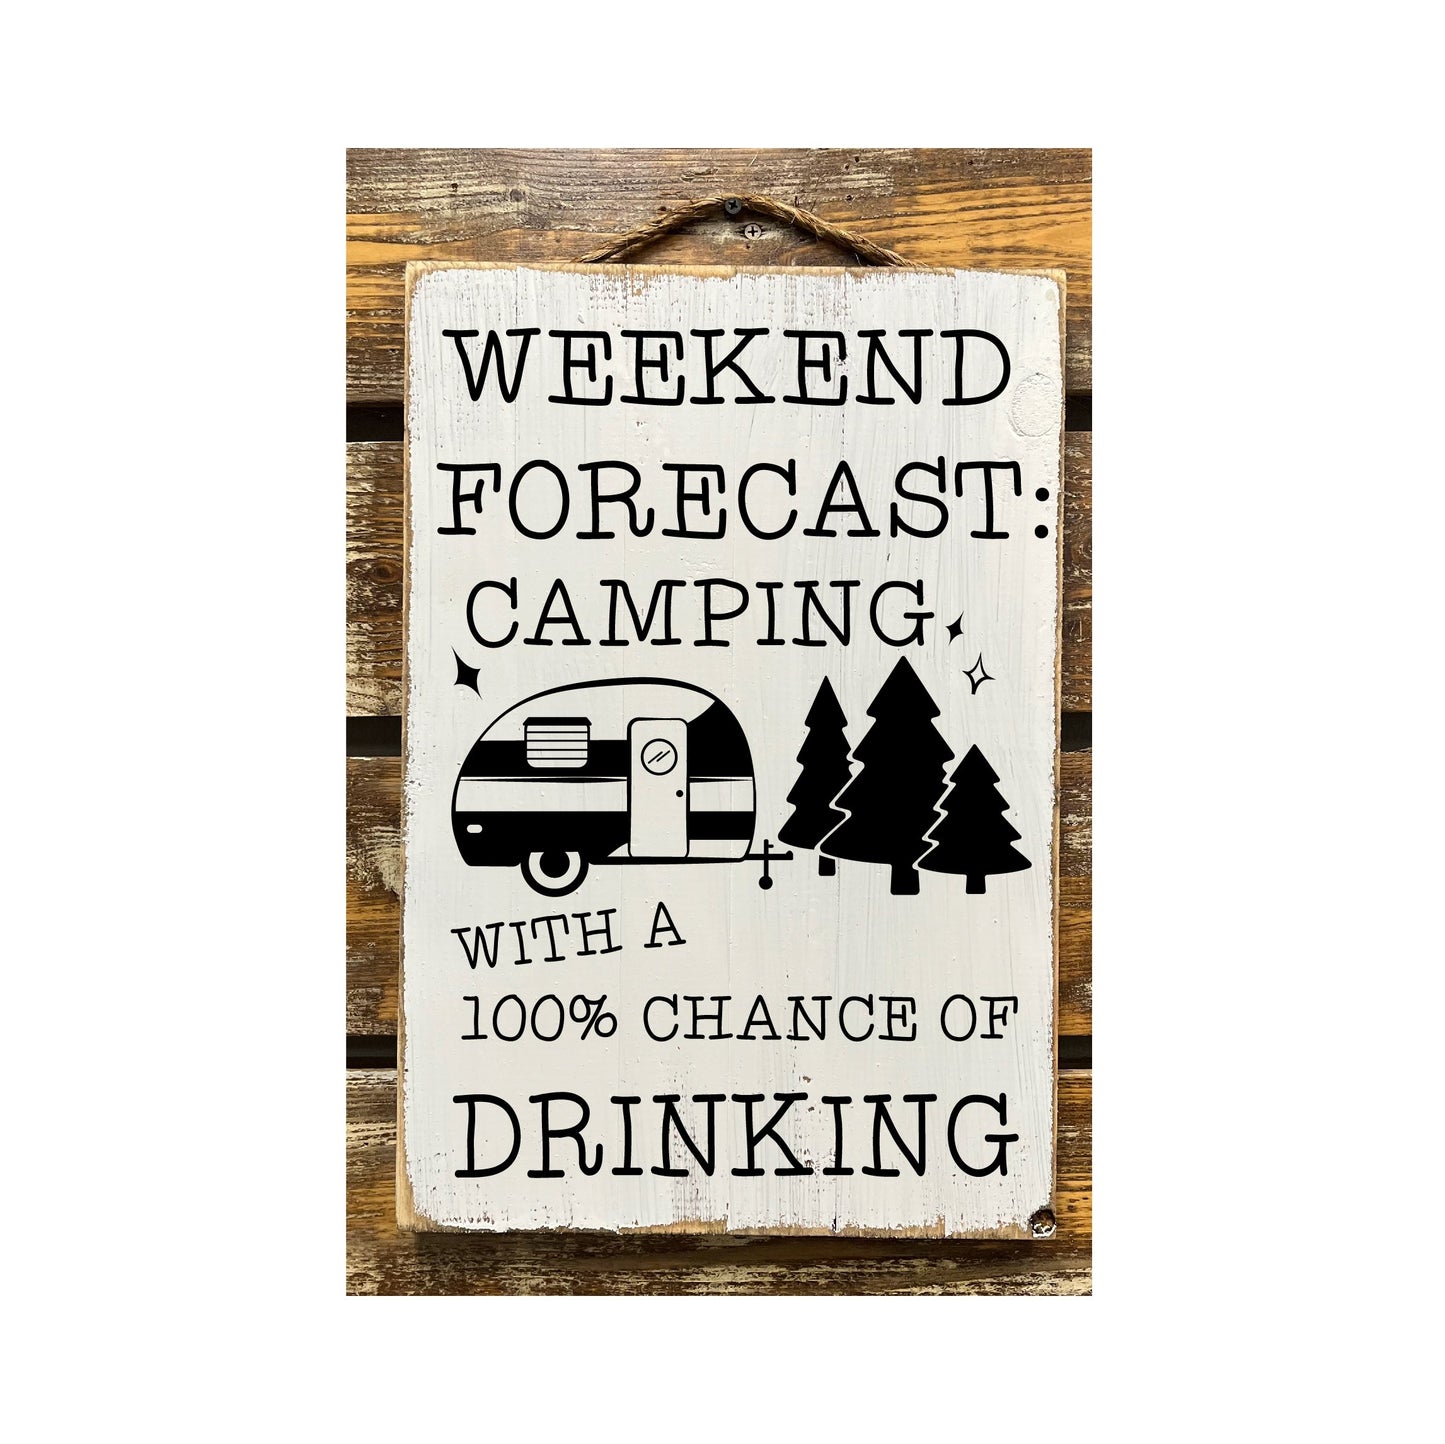 Weekend Forecast Camping With 100% Chance Of Drinking